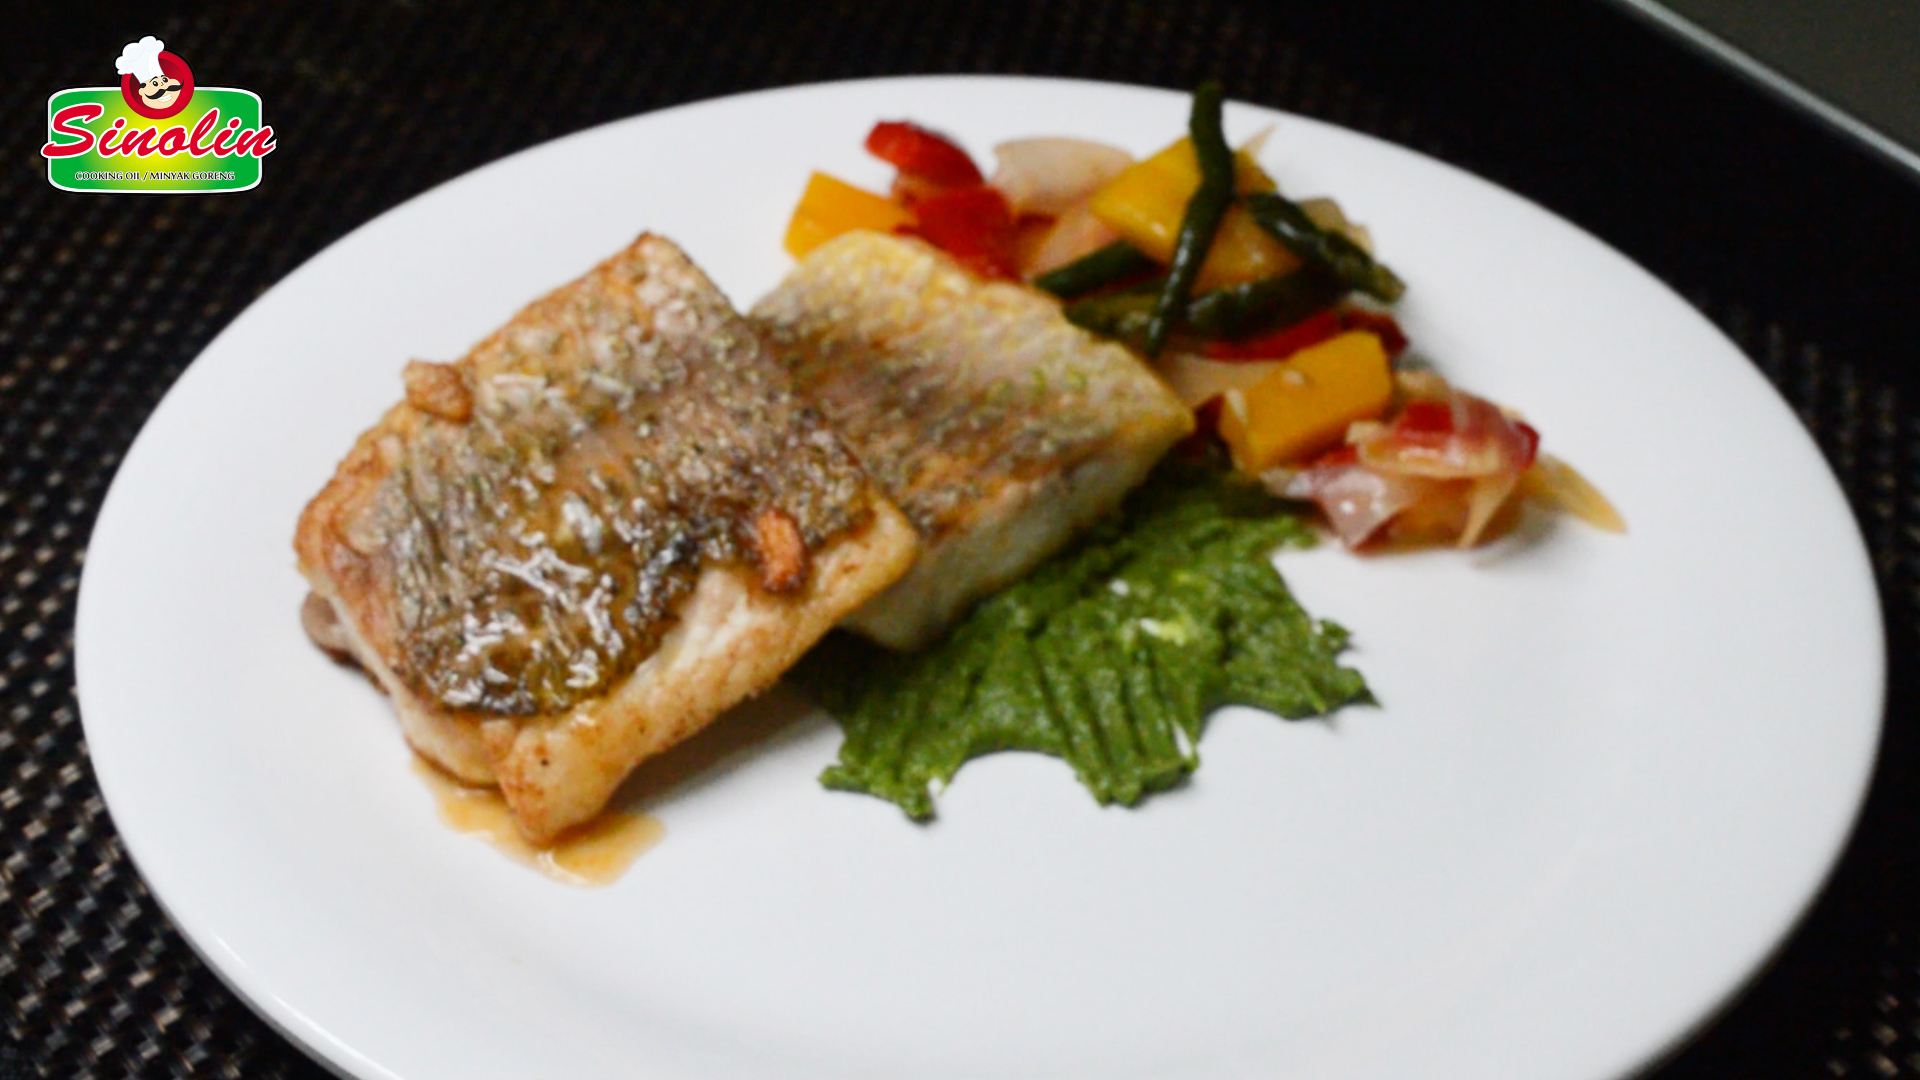 Konkani Grilled Fish with Spinach Sauce by Dapur Sinolin